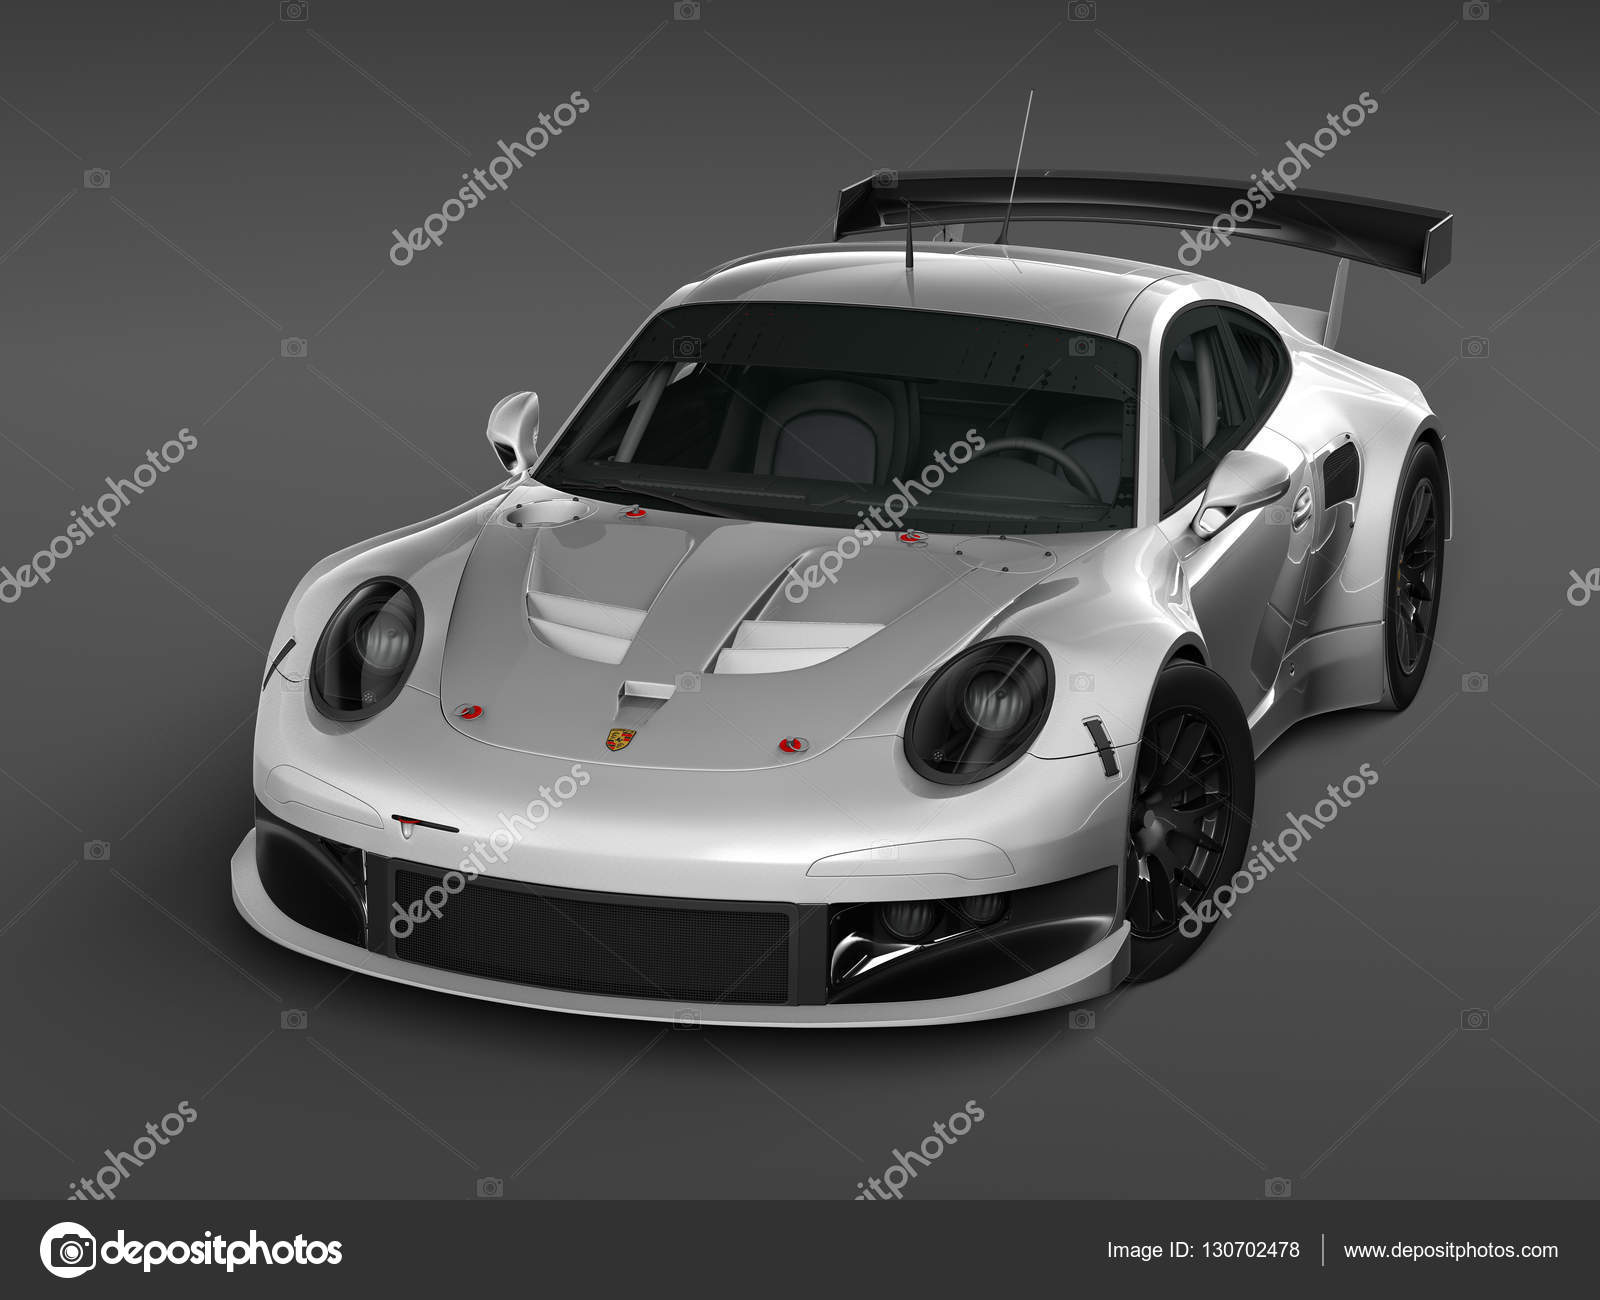 Super Sport Glossy White Race Car Isolated On Grey Background Stock Photo C Kayd 130702478